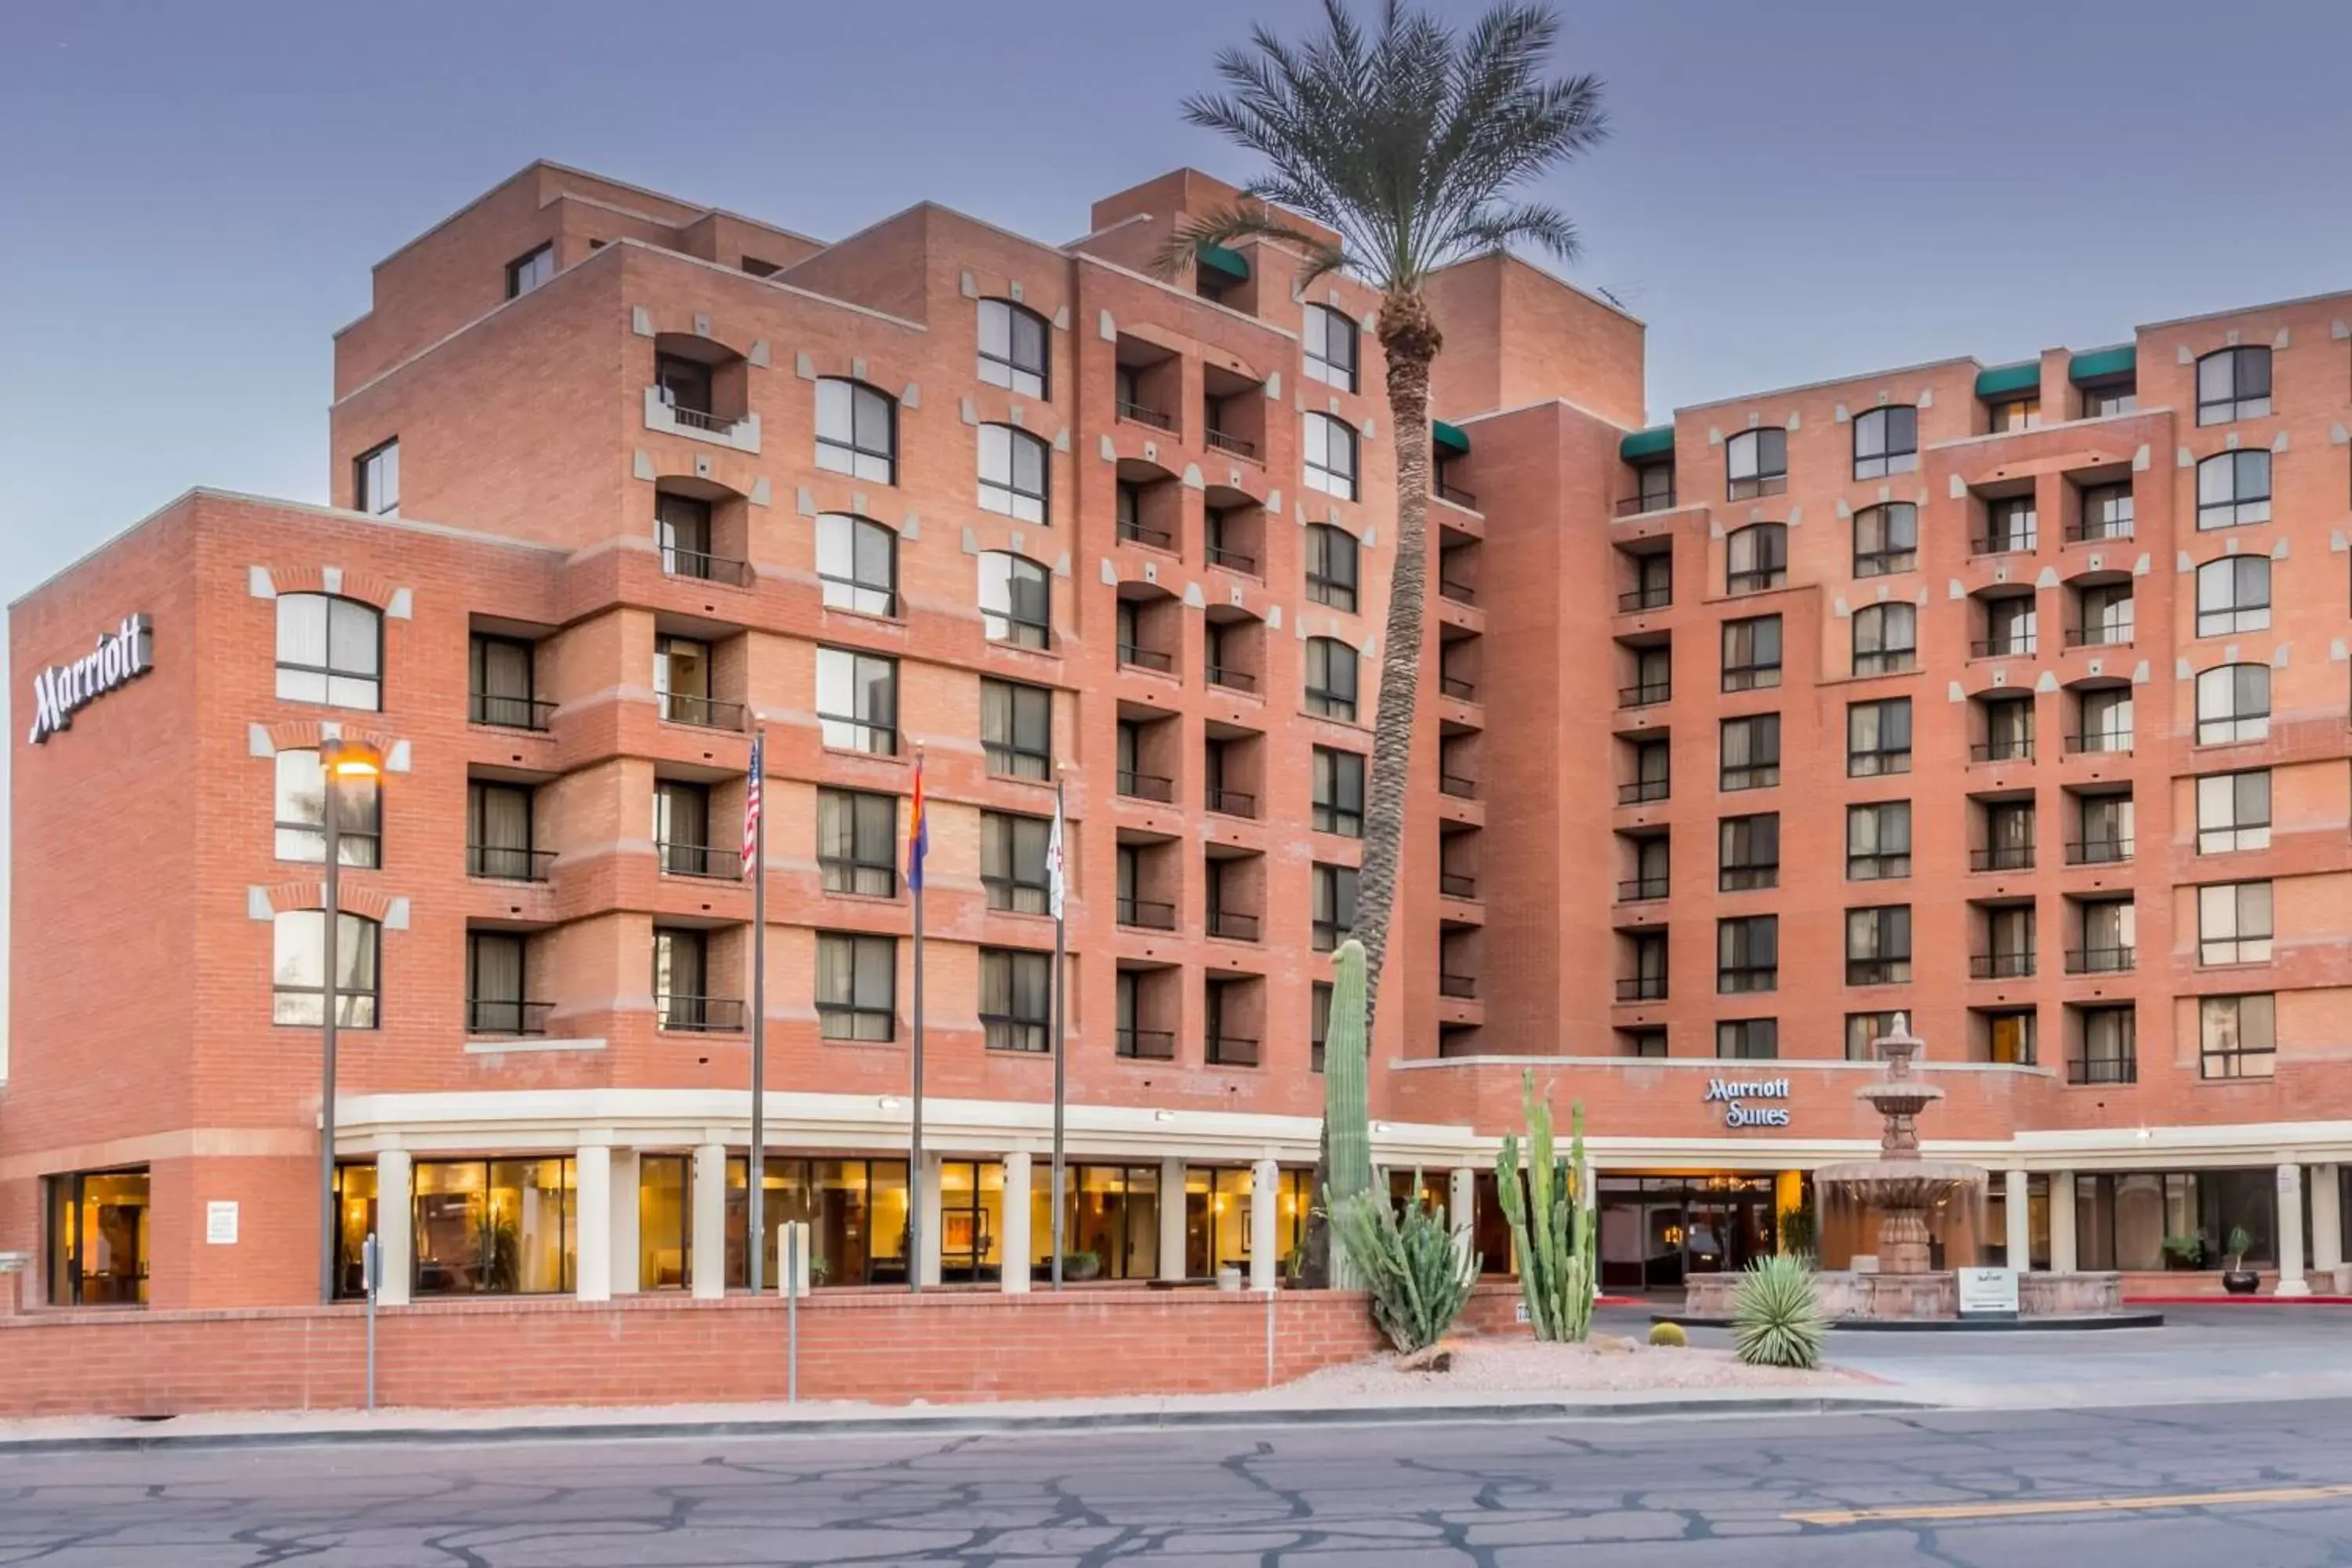 Property Building in Scottsdale Marriott Old Town